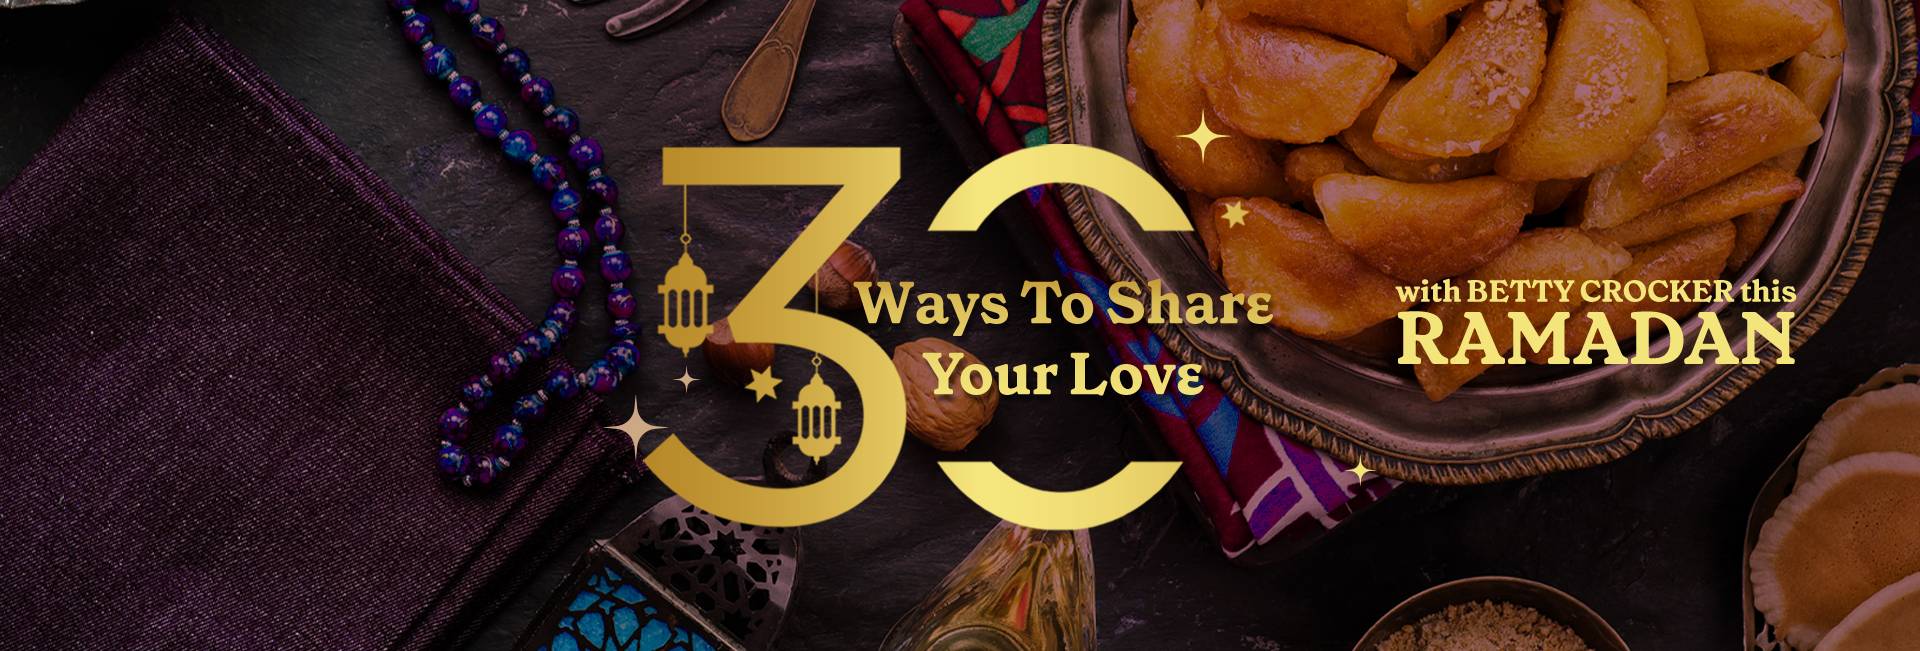 30 ways to share your love